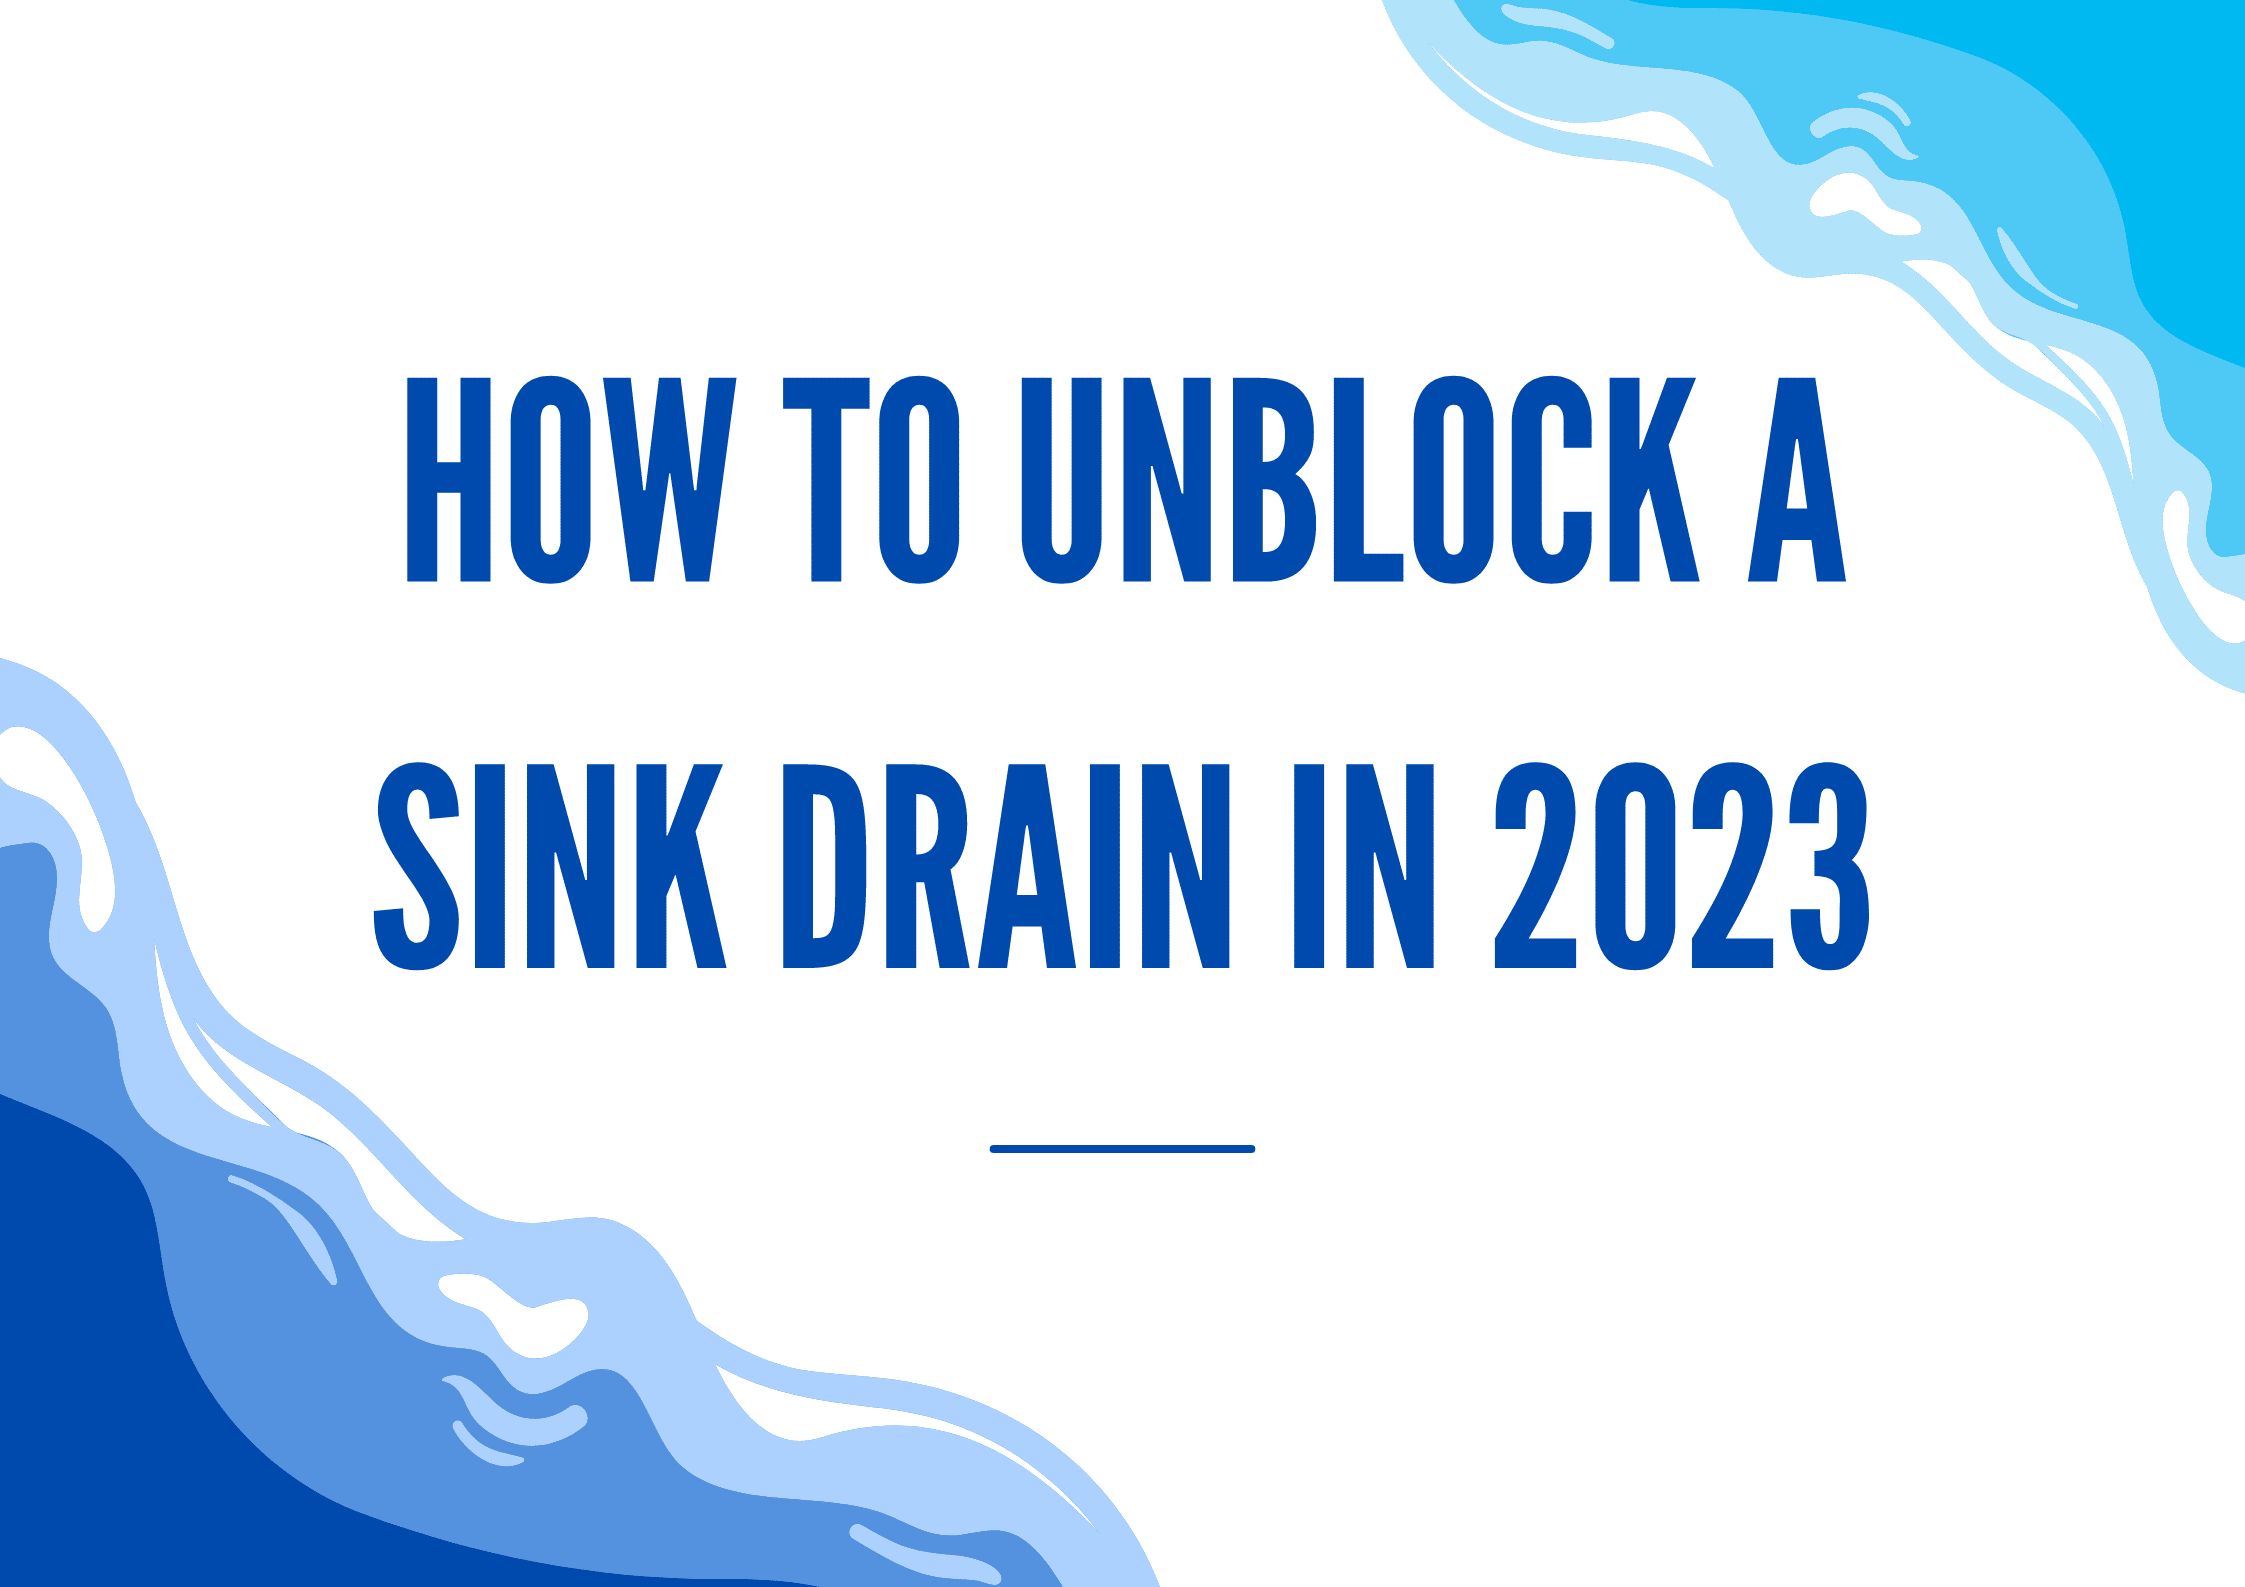 How To Unblock a Sink Drain in 2023